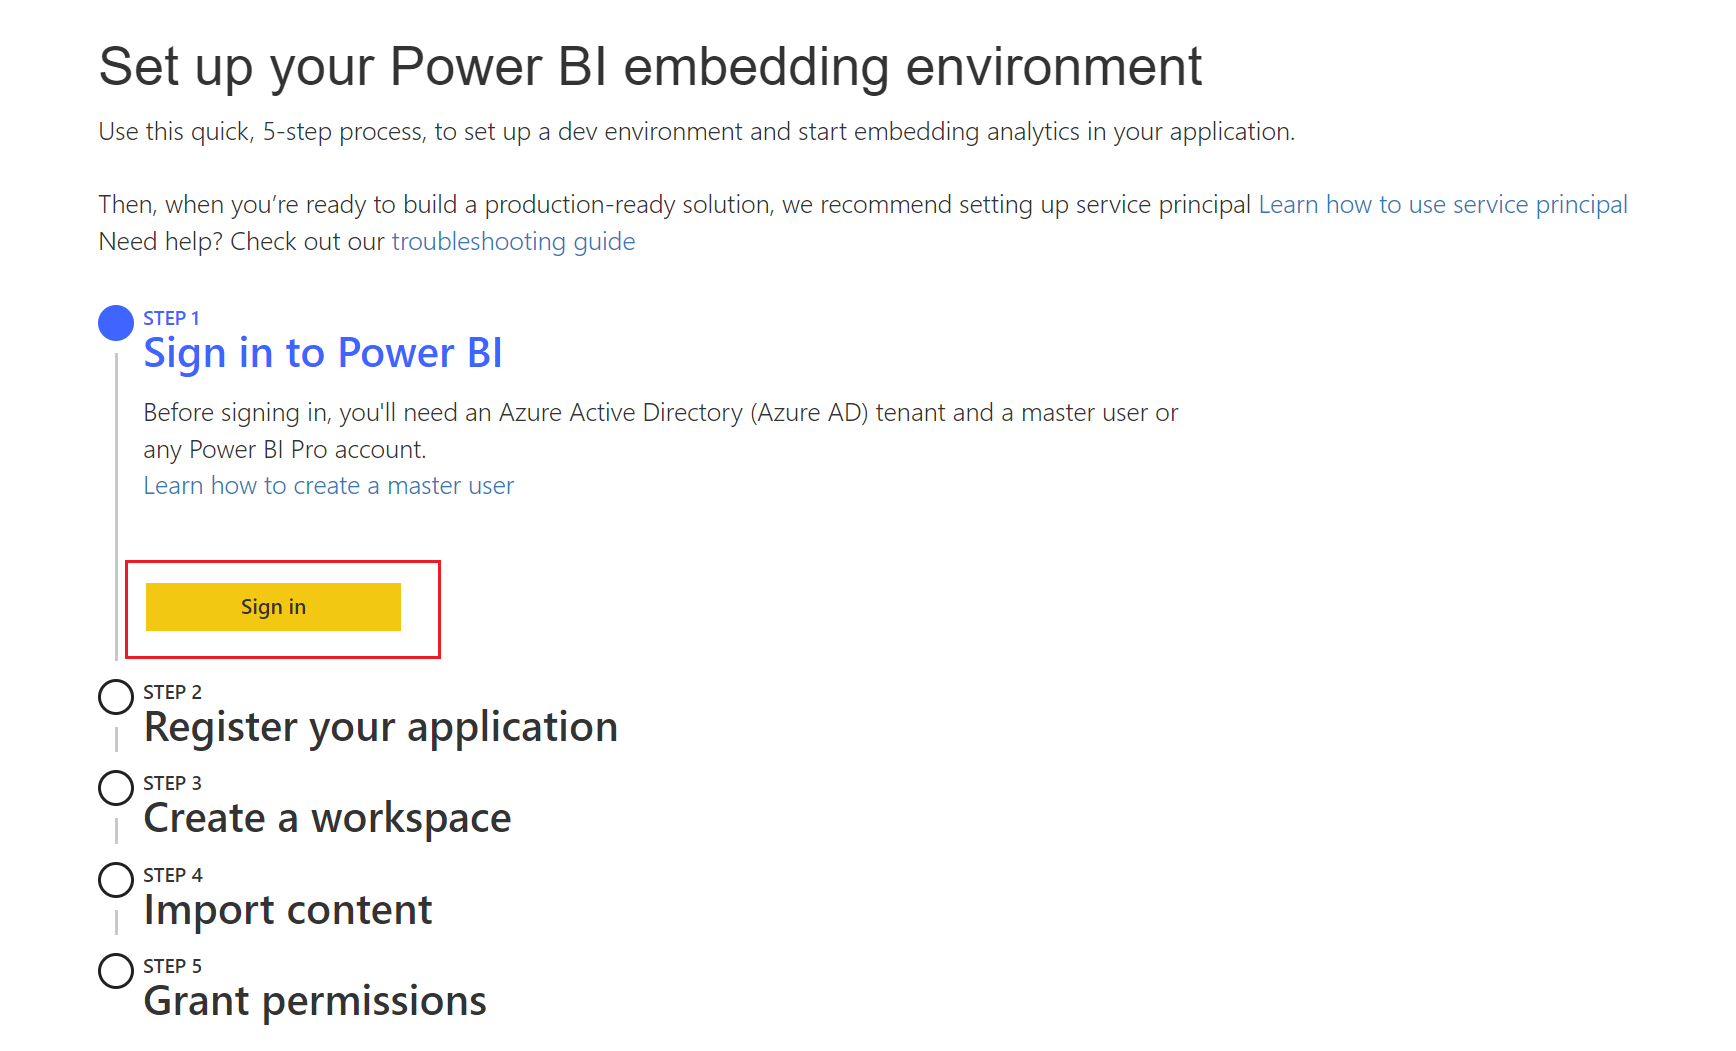 Screenshot of the Power BI embedded analytics setup tool. Under Step 1, the Sign in button is highlighted.